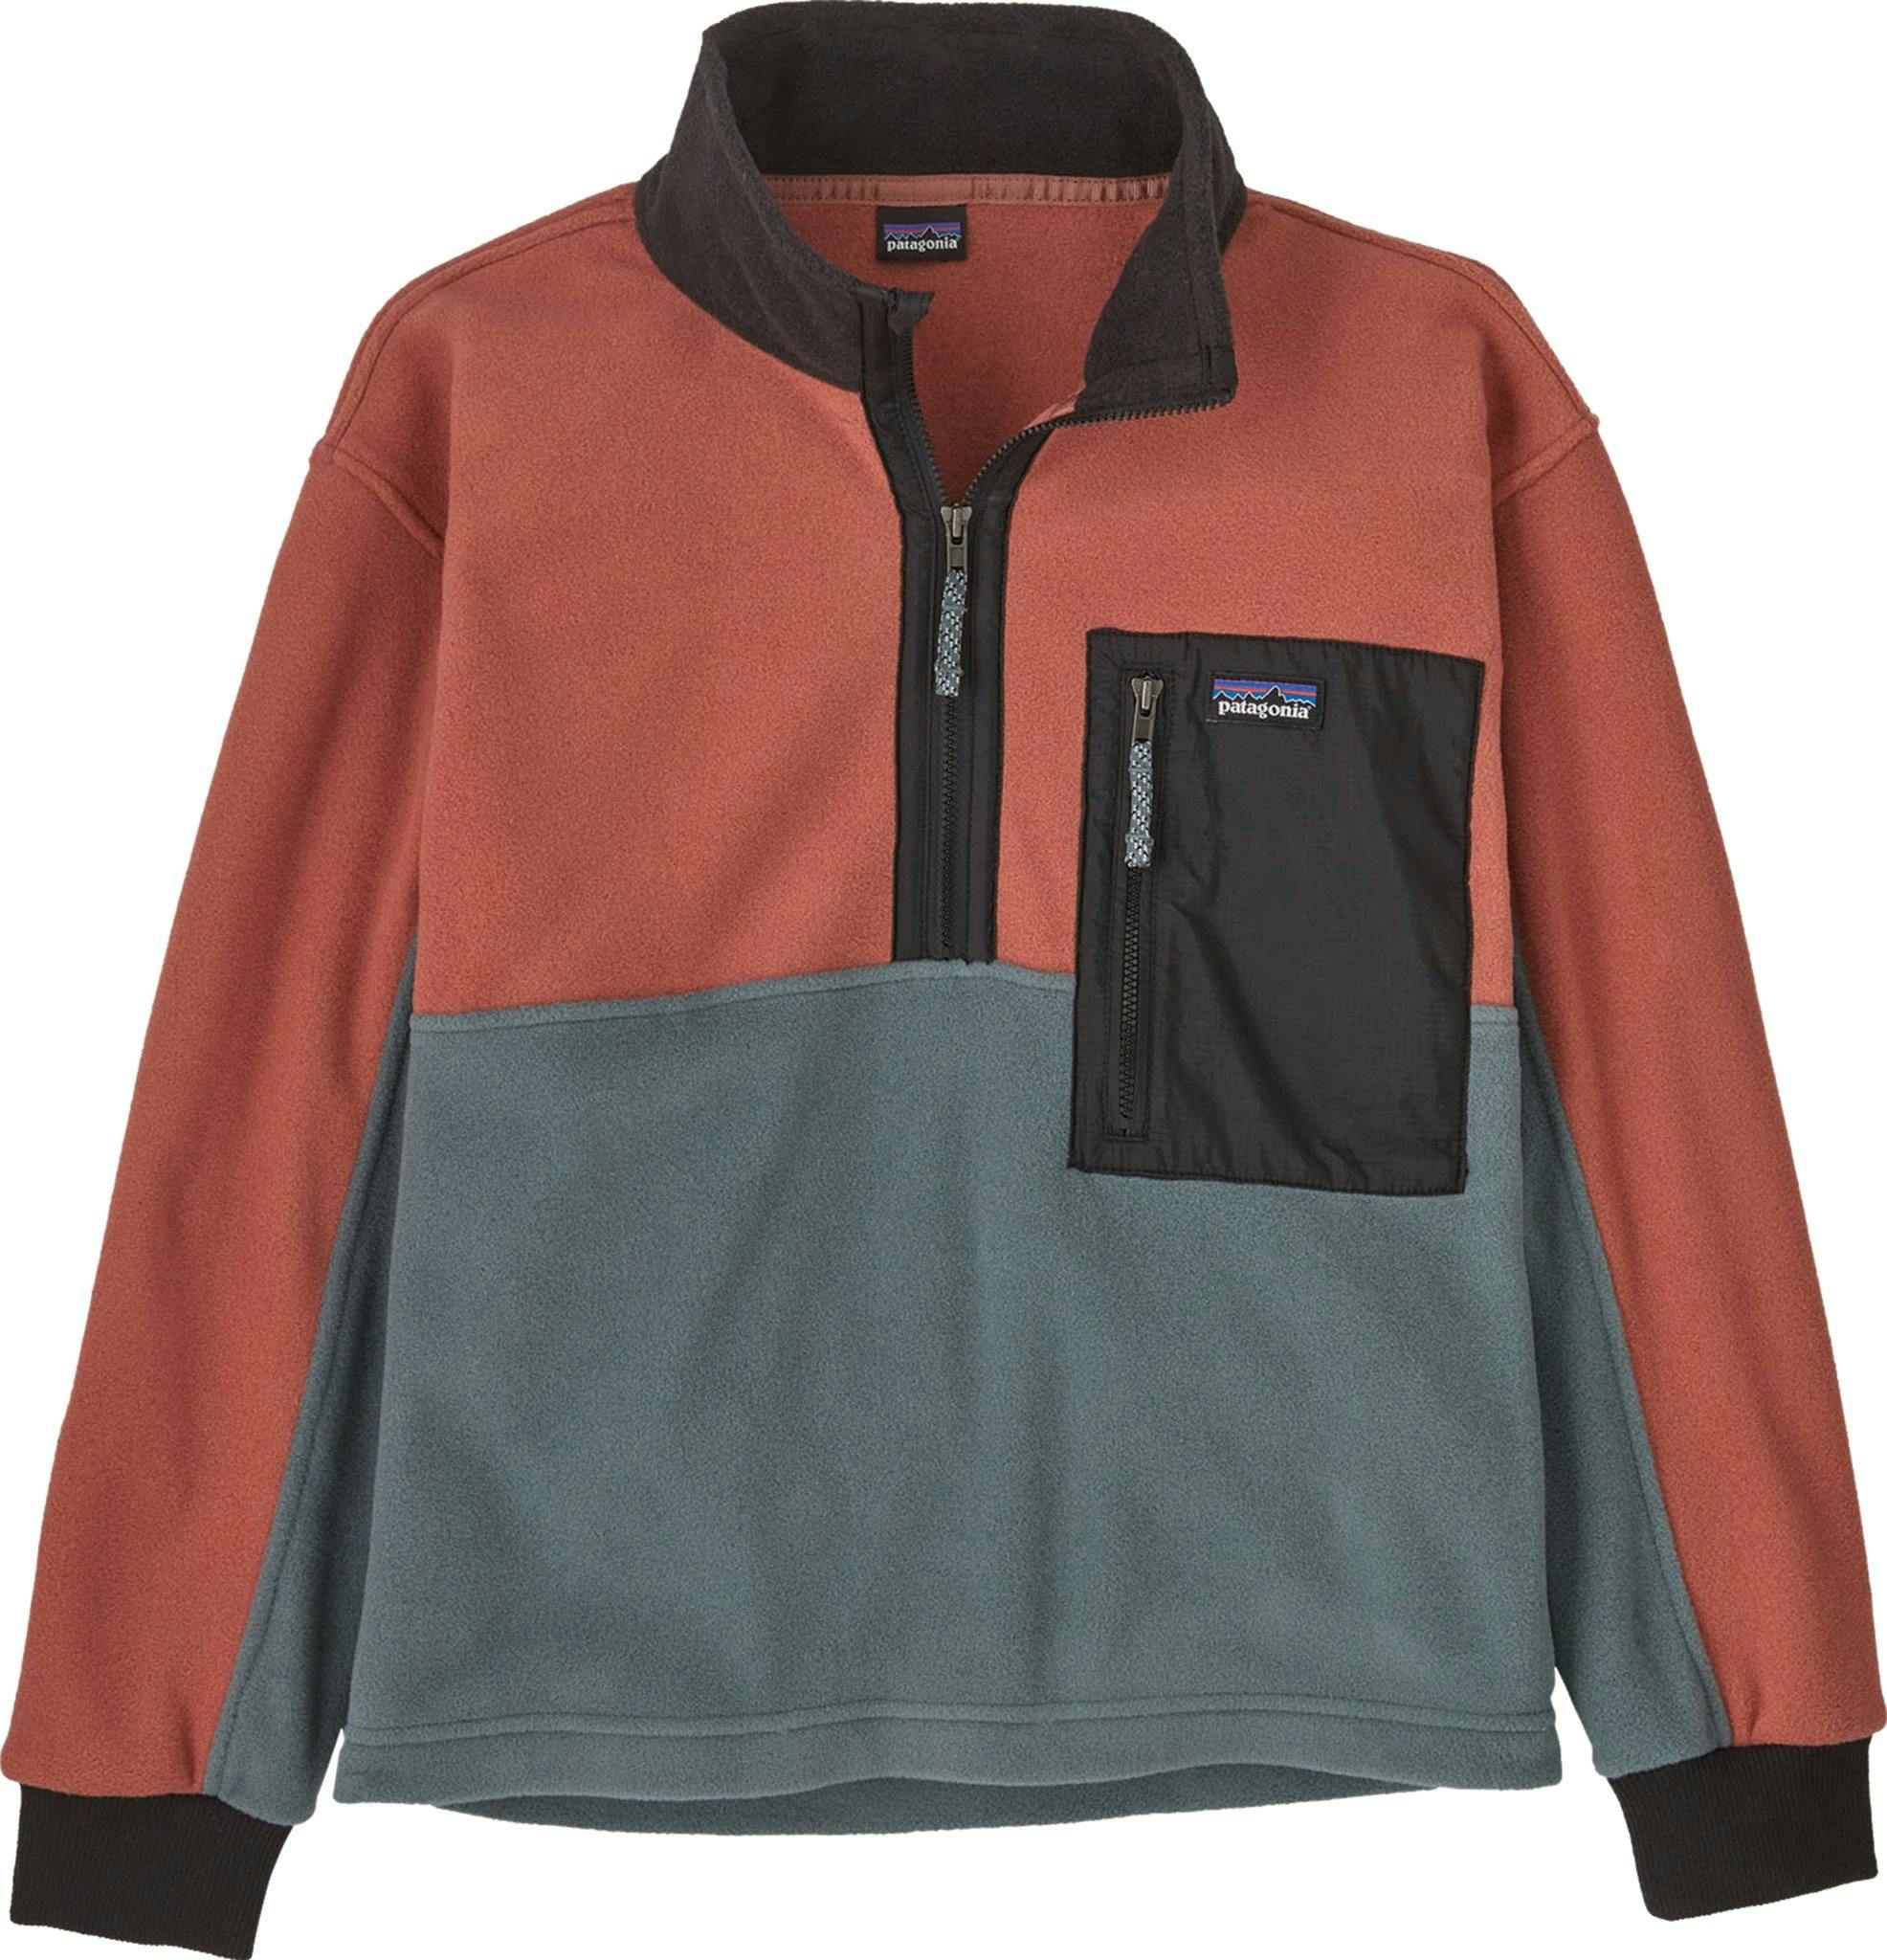 Product image for Microdini 1/2 Zip Fleece Pullover - Kids